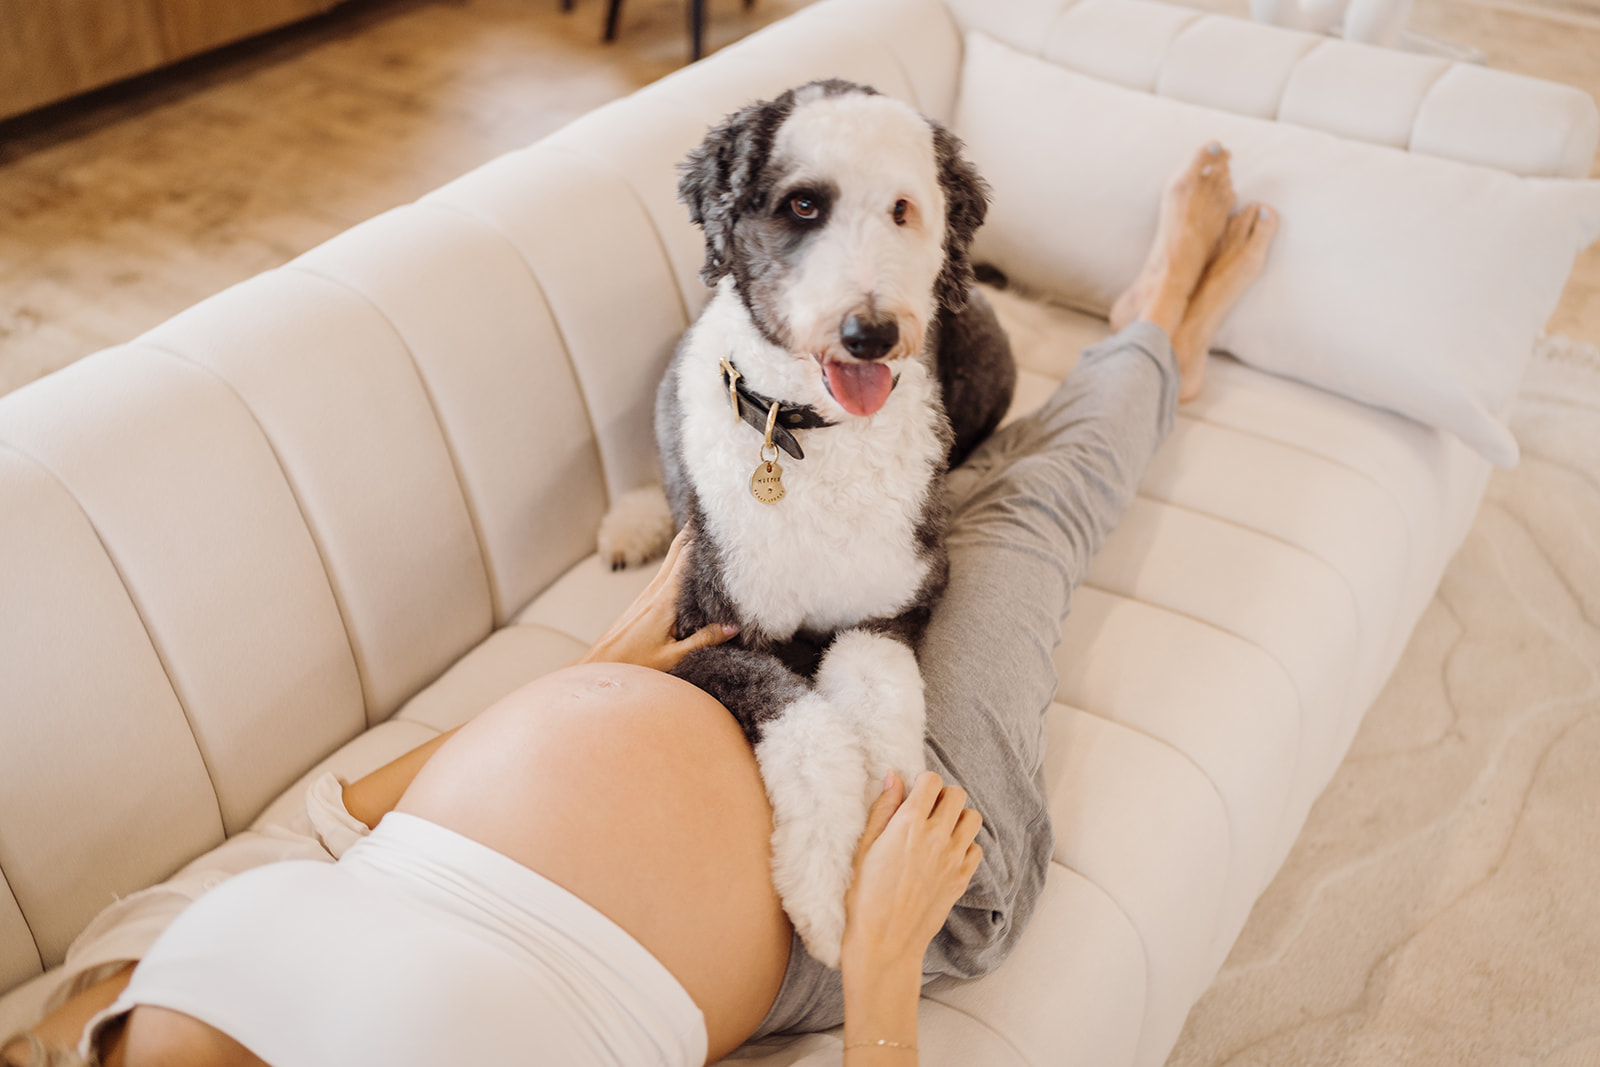 A dog sitting on a lady's legs on the couch.